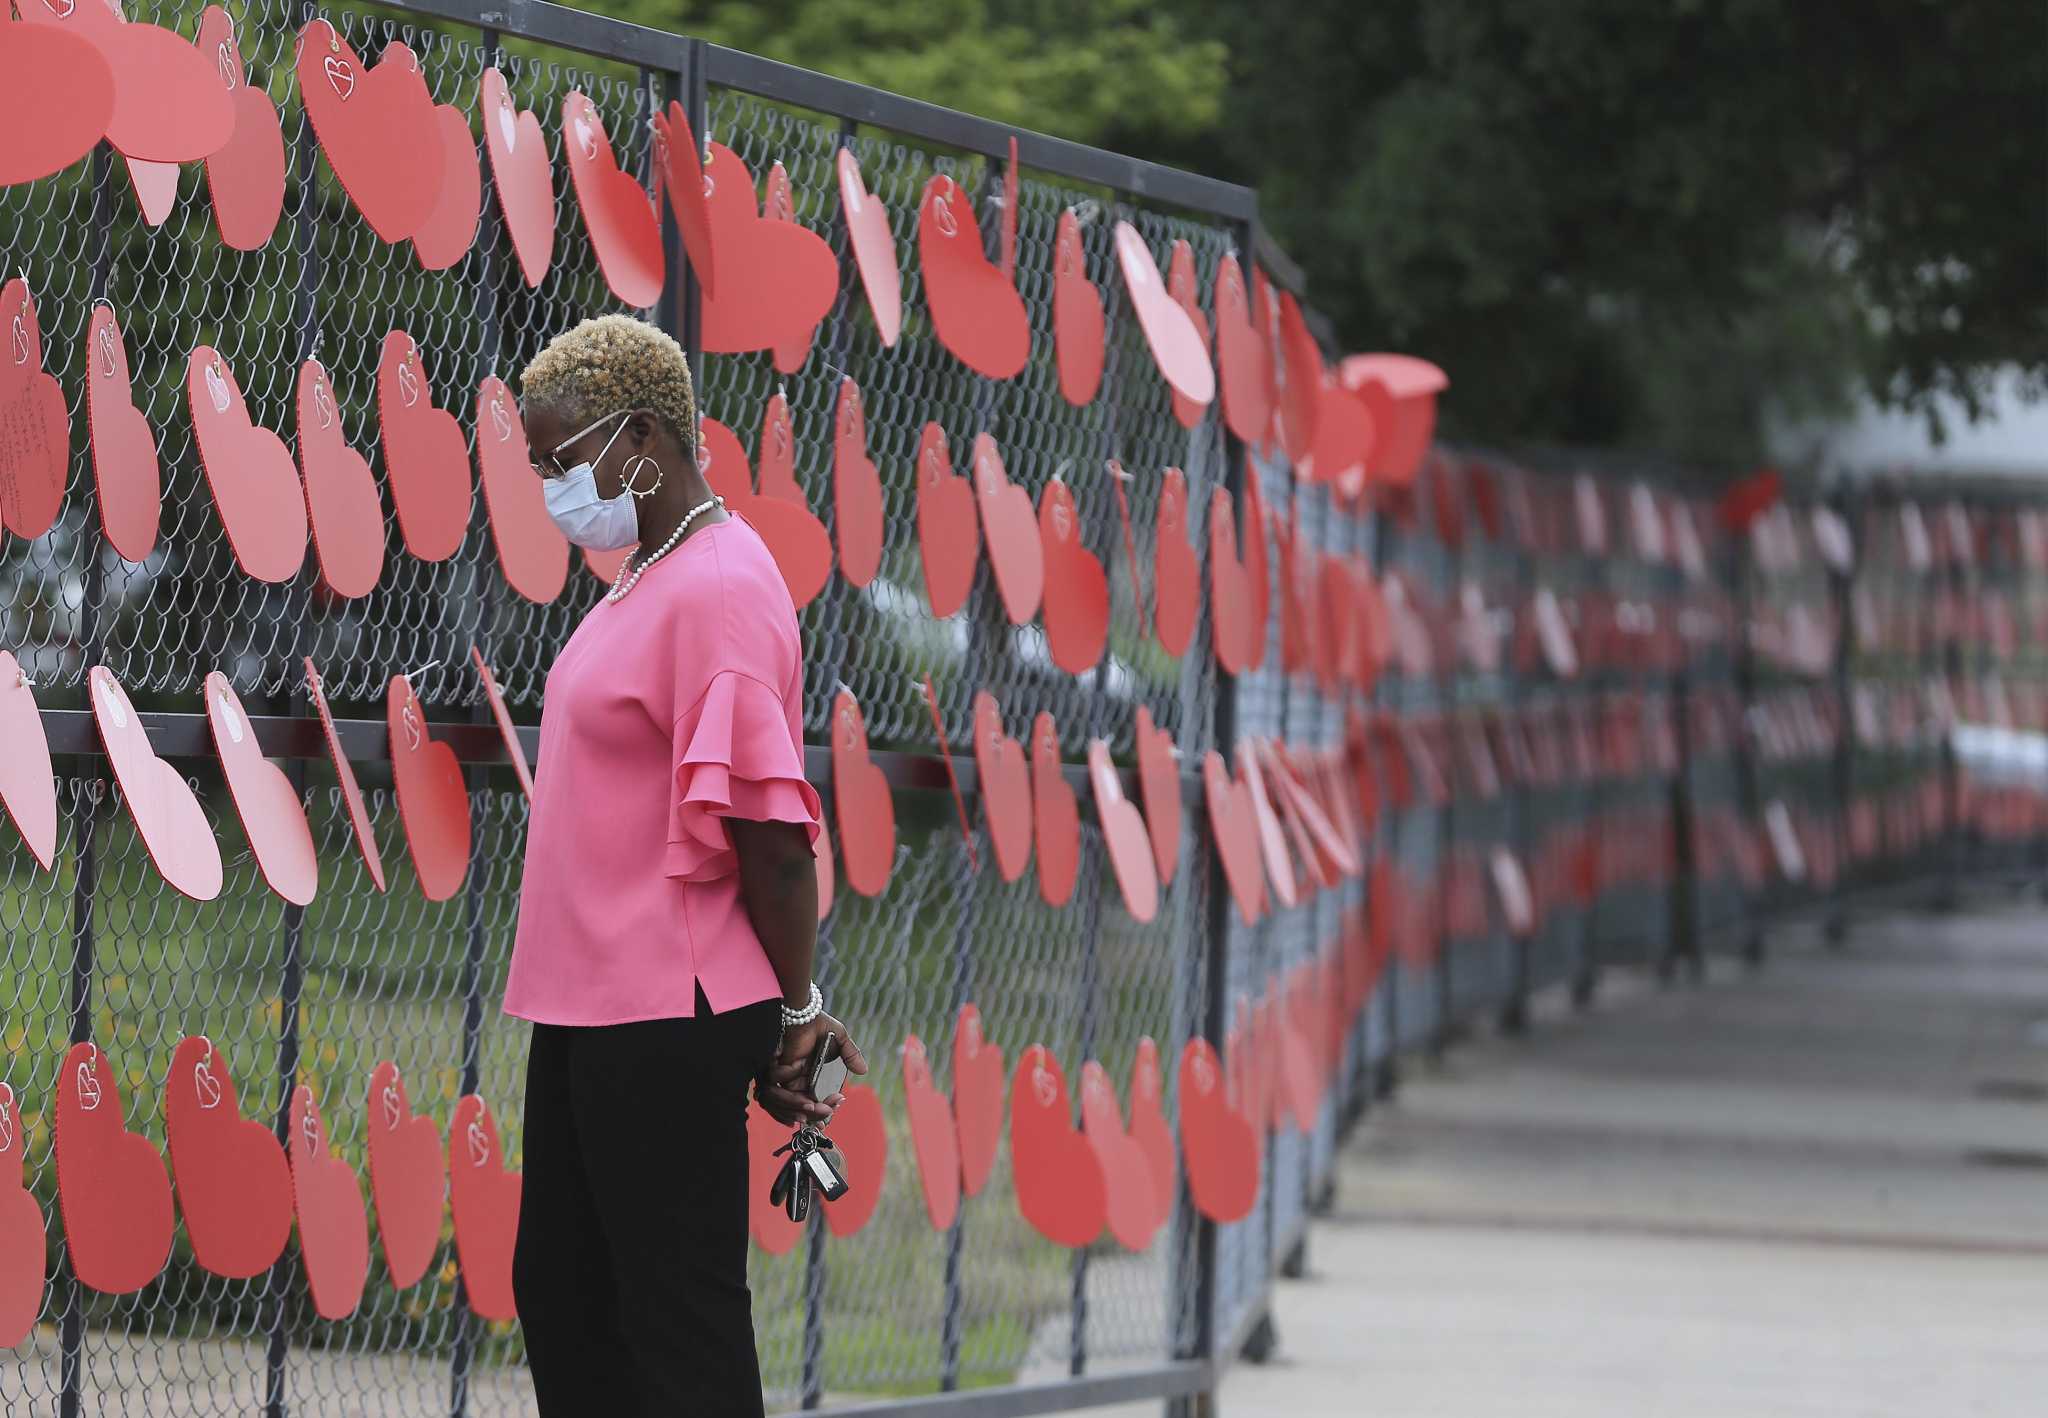 San Antonio memorial honors more than 3,400 lives lost because of COVID19